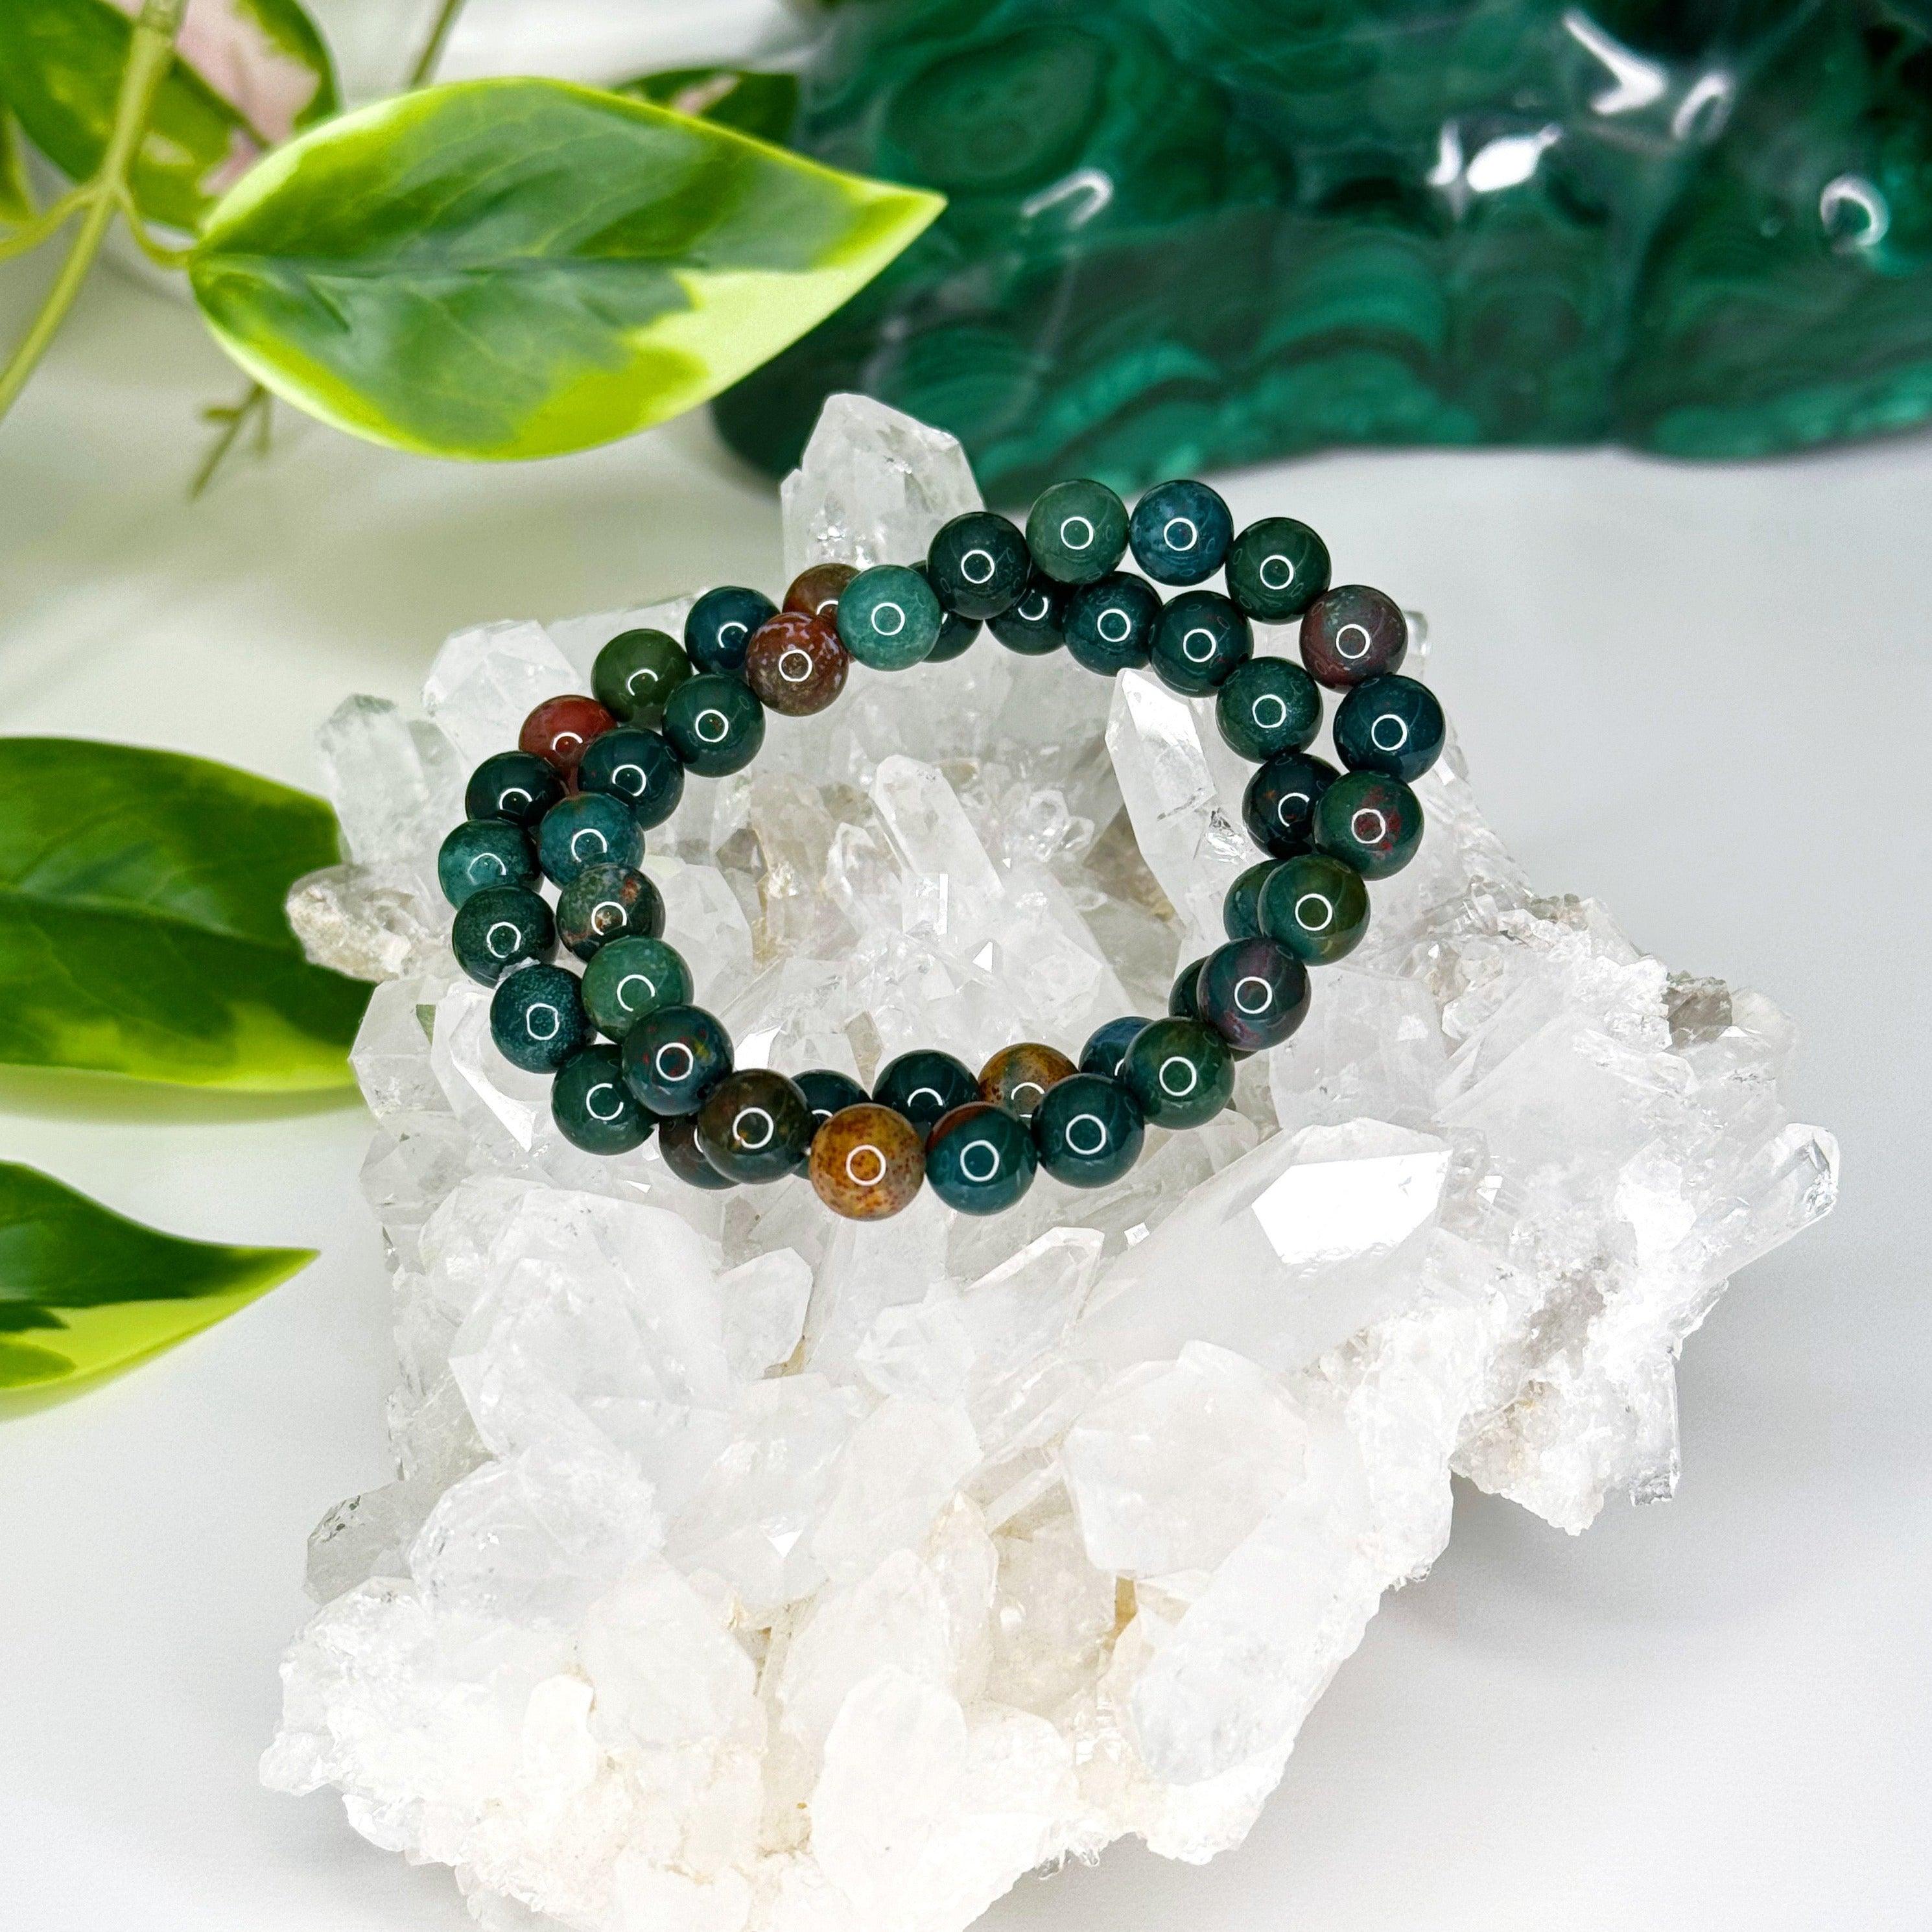 BLOODSTONE 8mm - HANDMADE CRYSTAL BRACELET - 8mm, aries, bloodstone, bracelet, capricorn, crystal bracelet, emotional support, fire, green, handmade bracelet, jewelry, libra, market bracelet, may day/beltane, mixed colors, recently added, red, single bracelets, solstice collection, Wearable, winter solstice collection - The Mineral Maven